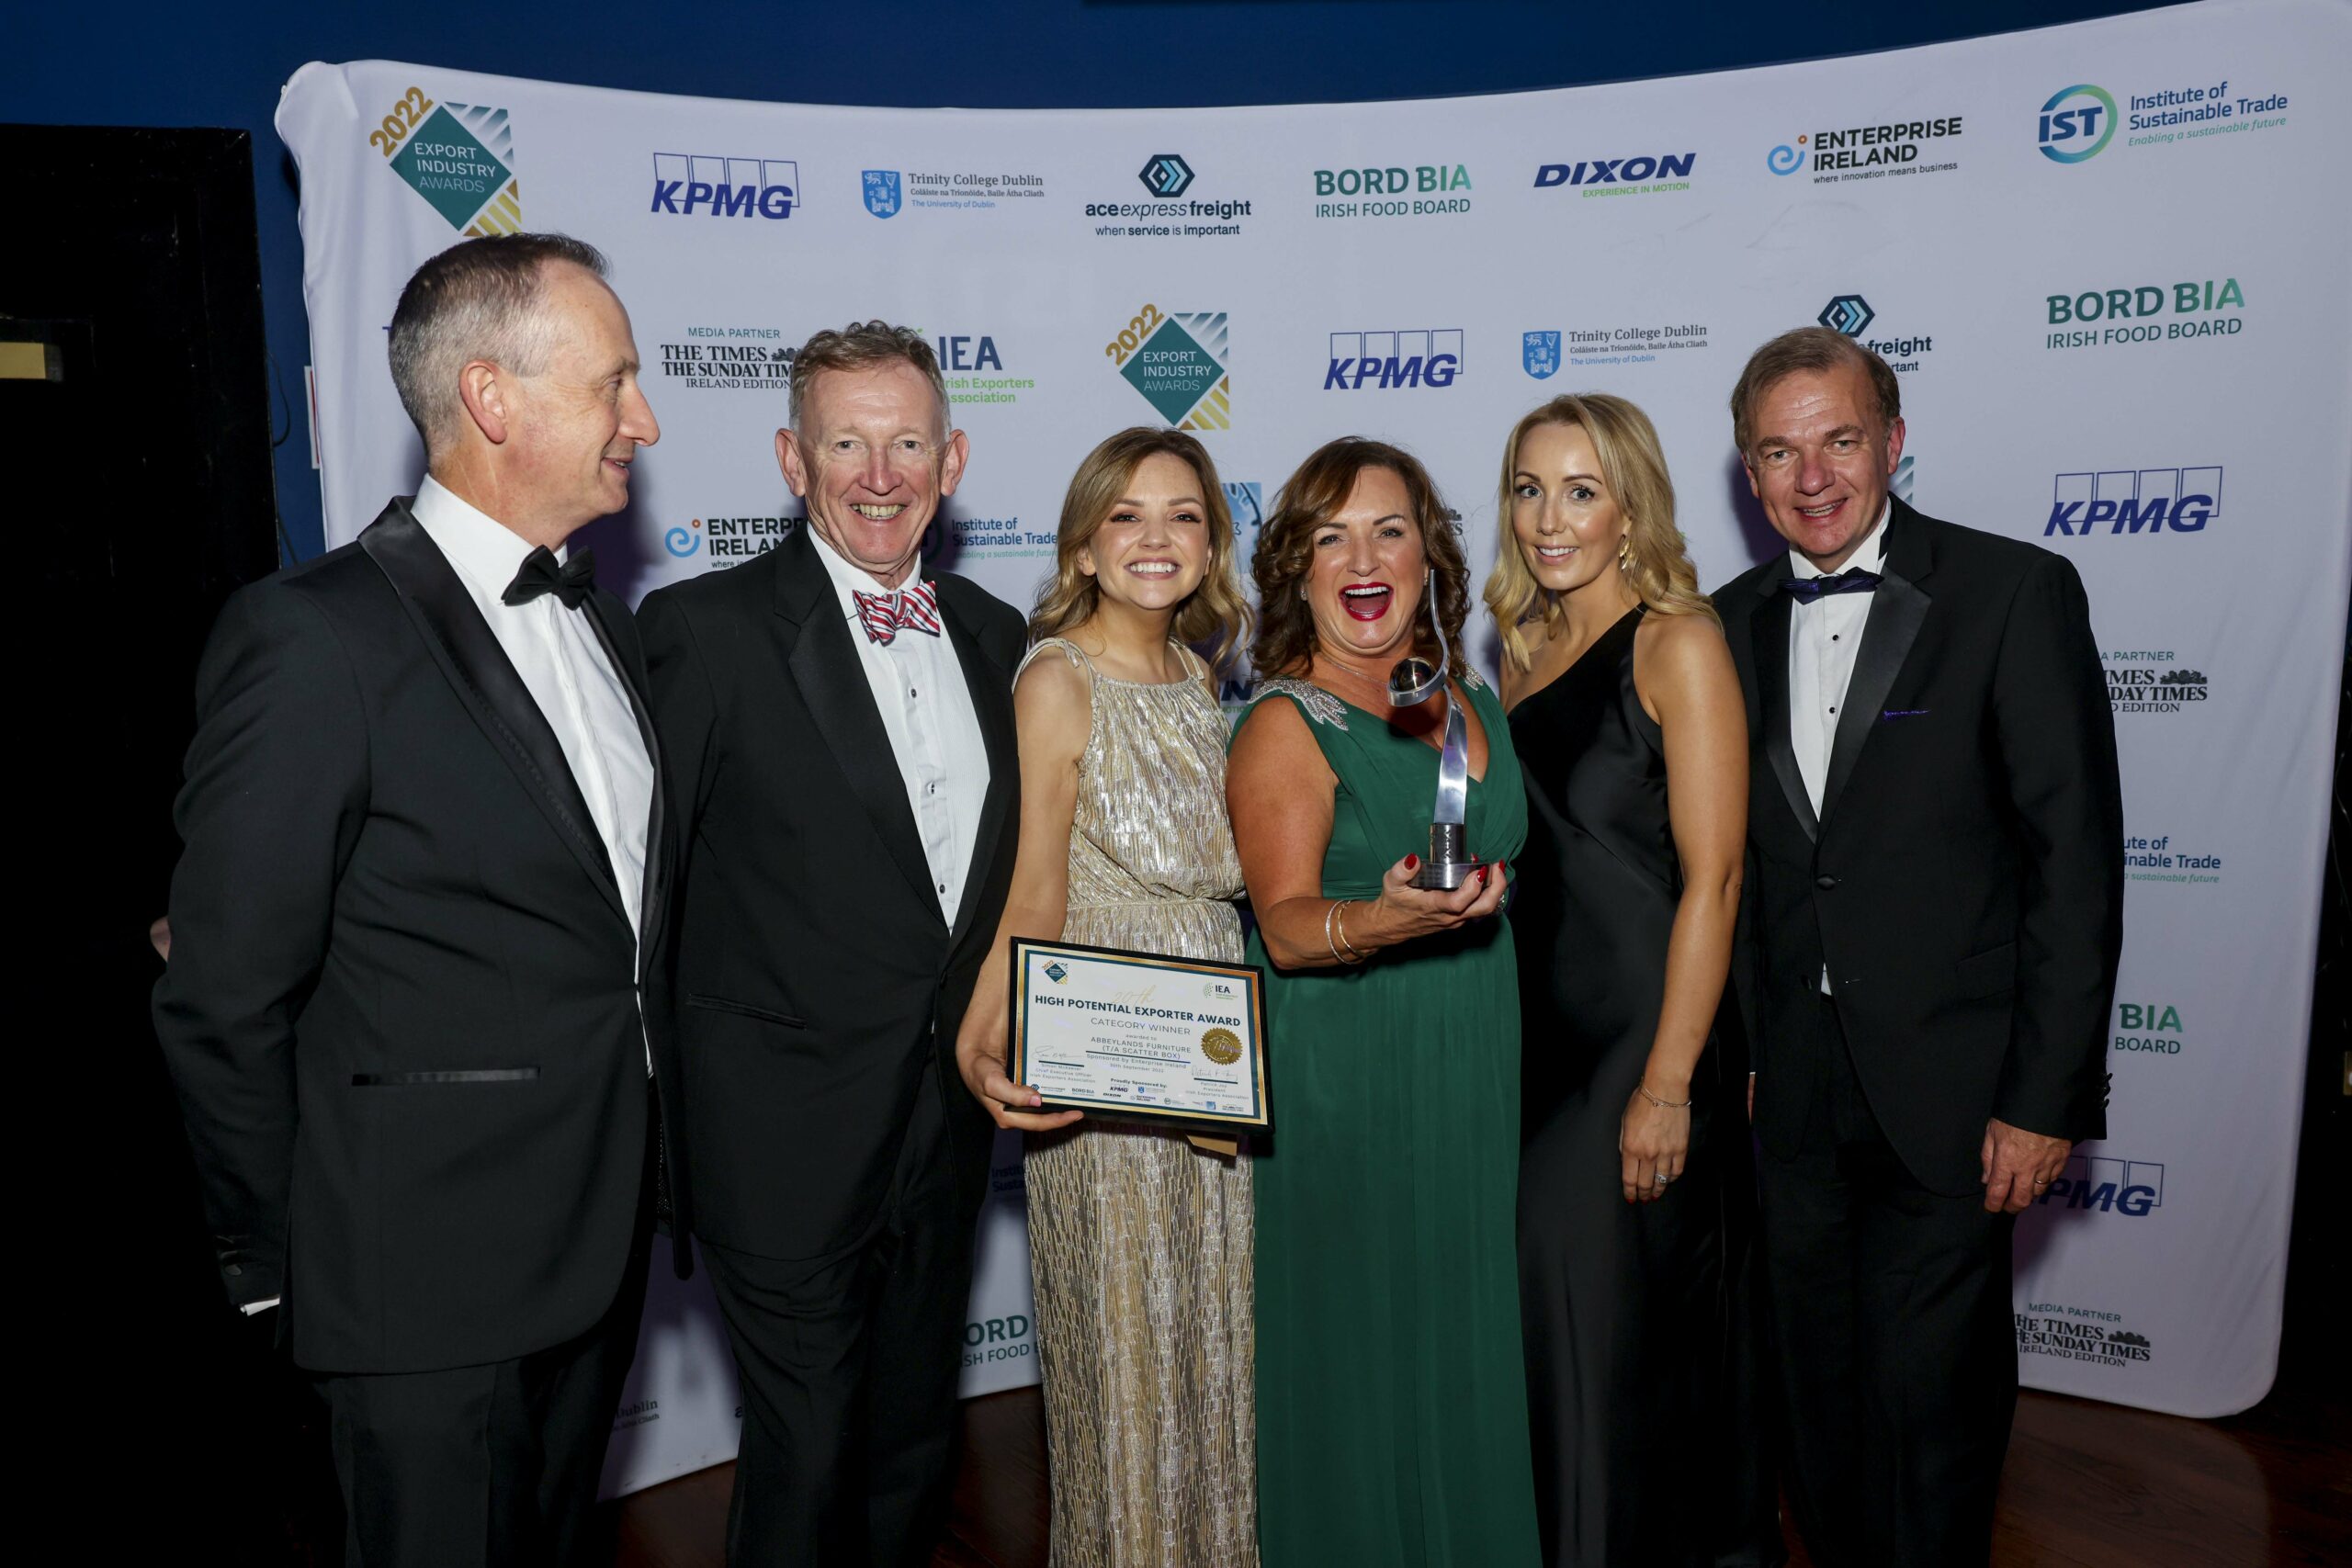 IEA Export Industry Awards 2022

Fennell Photography 2022